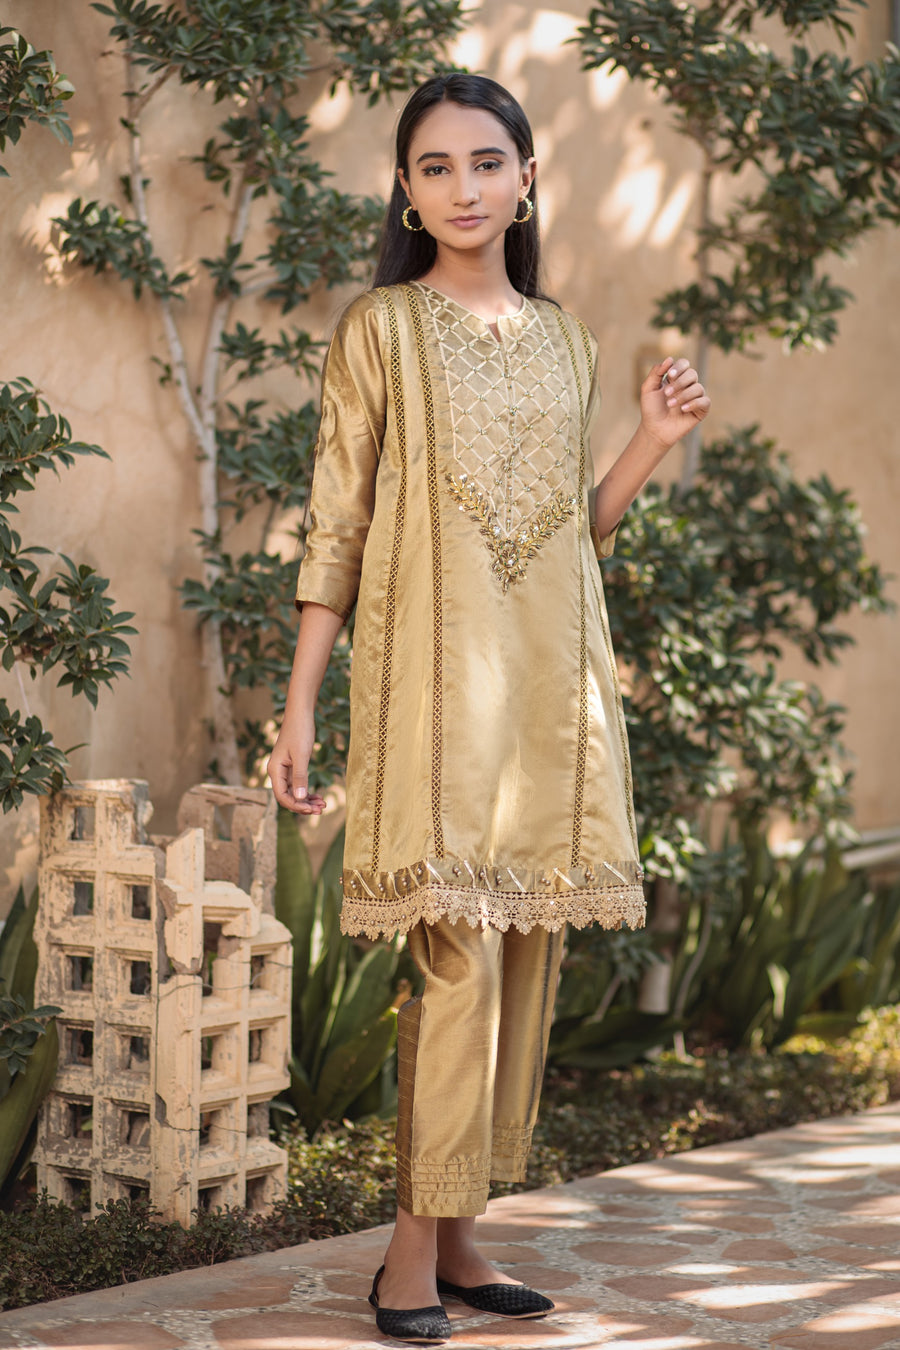 French Beige Frock- Areeba's Couture